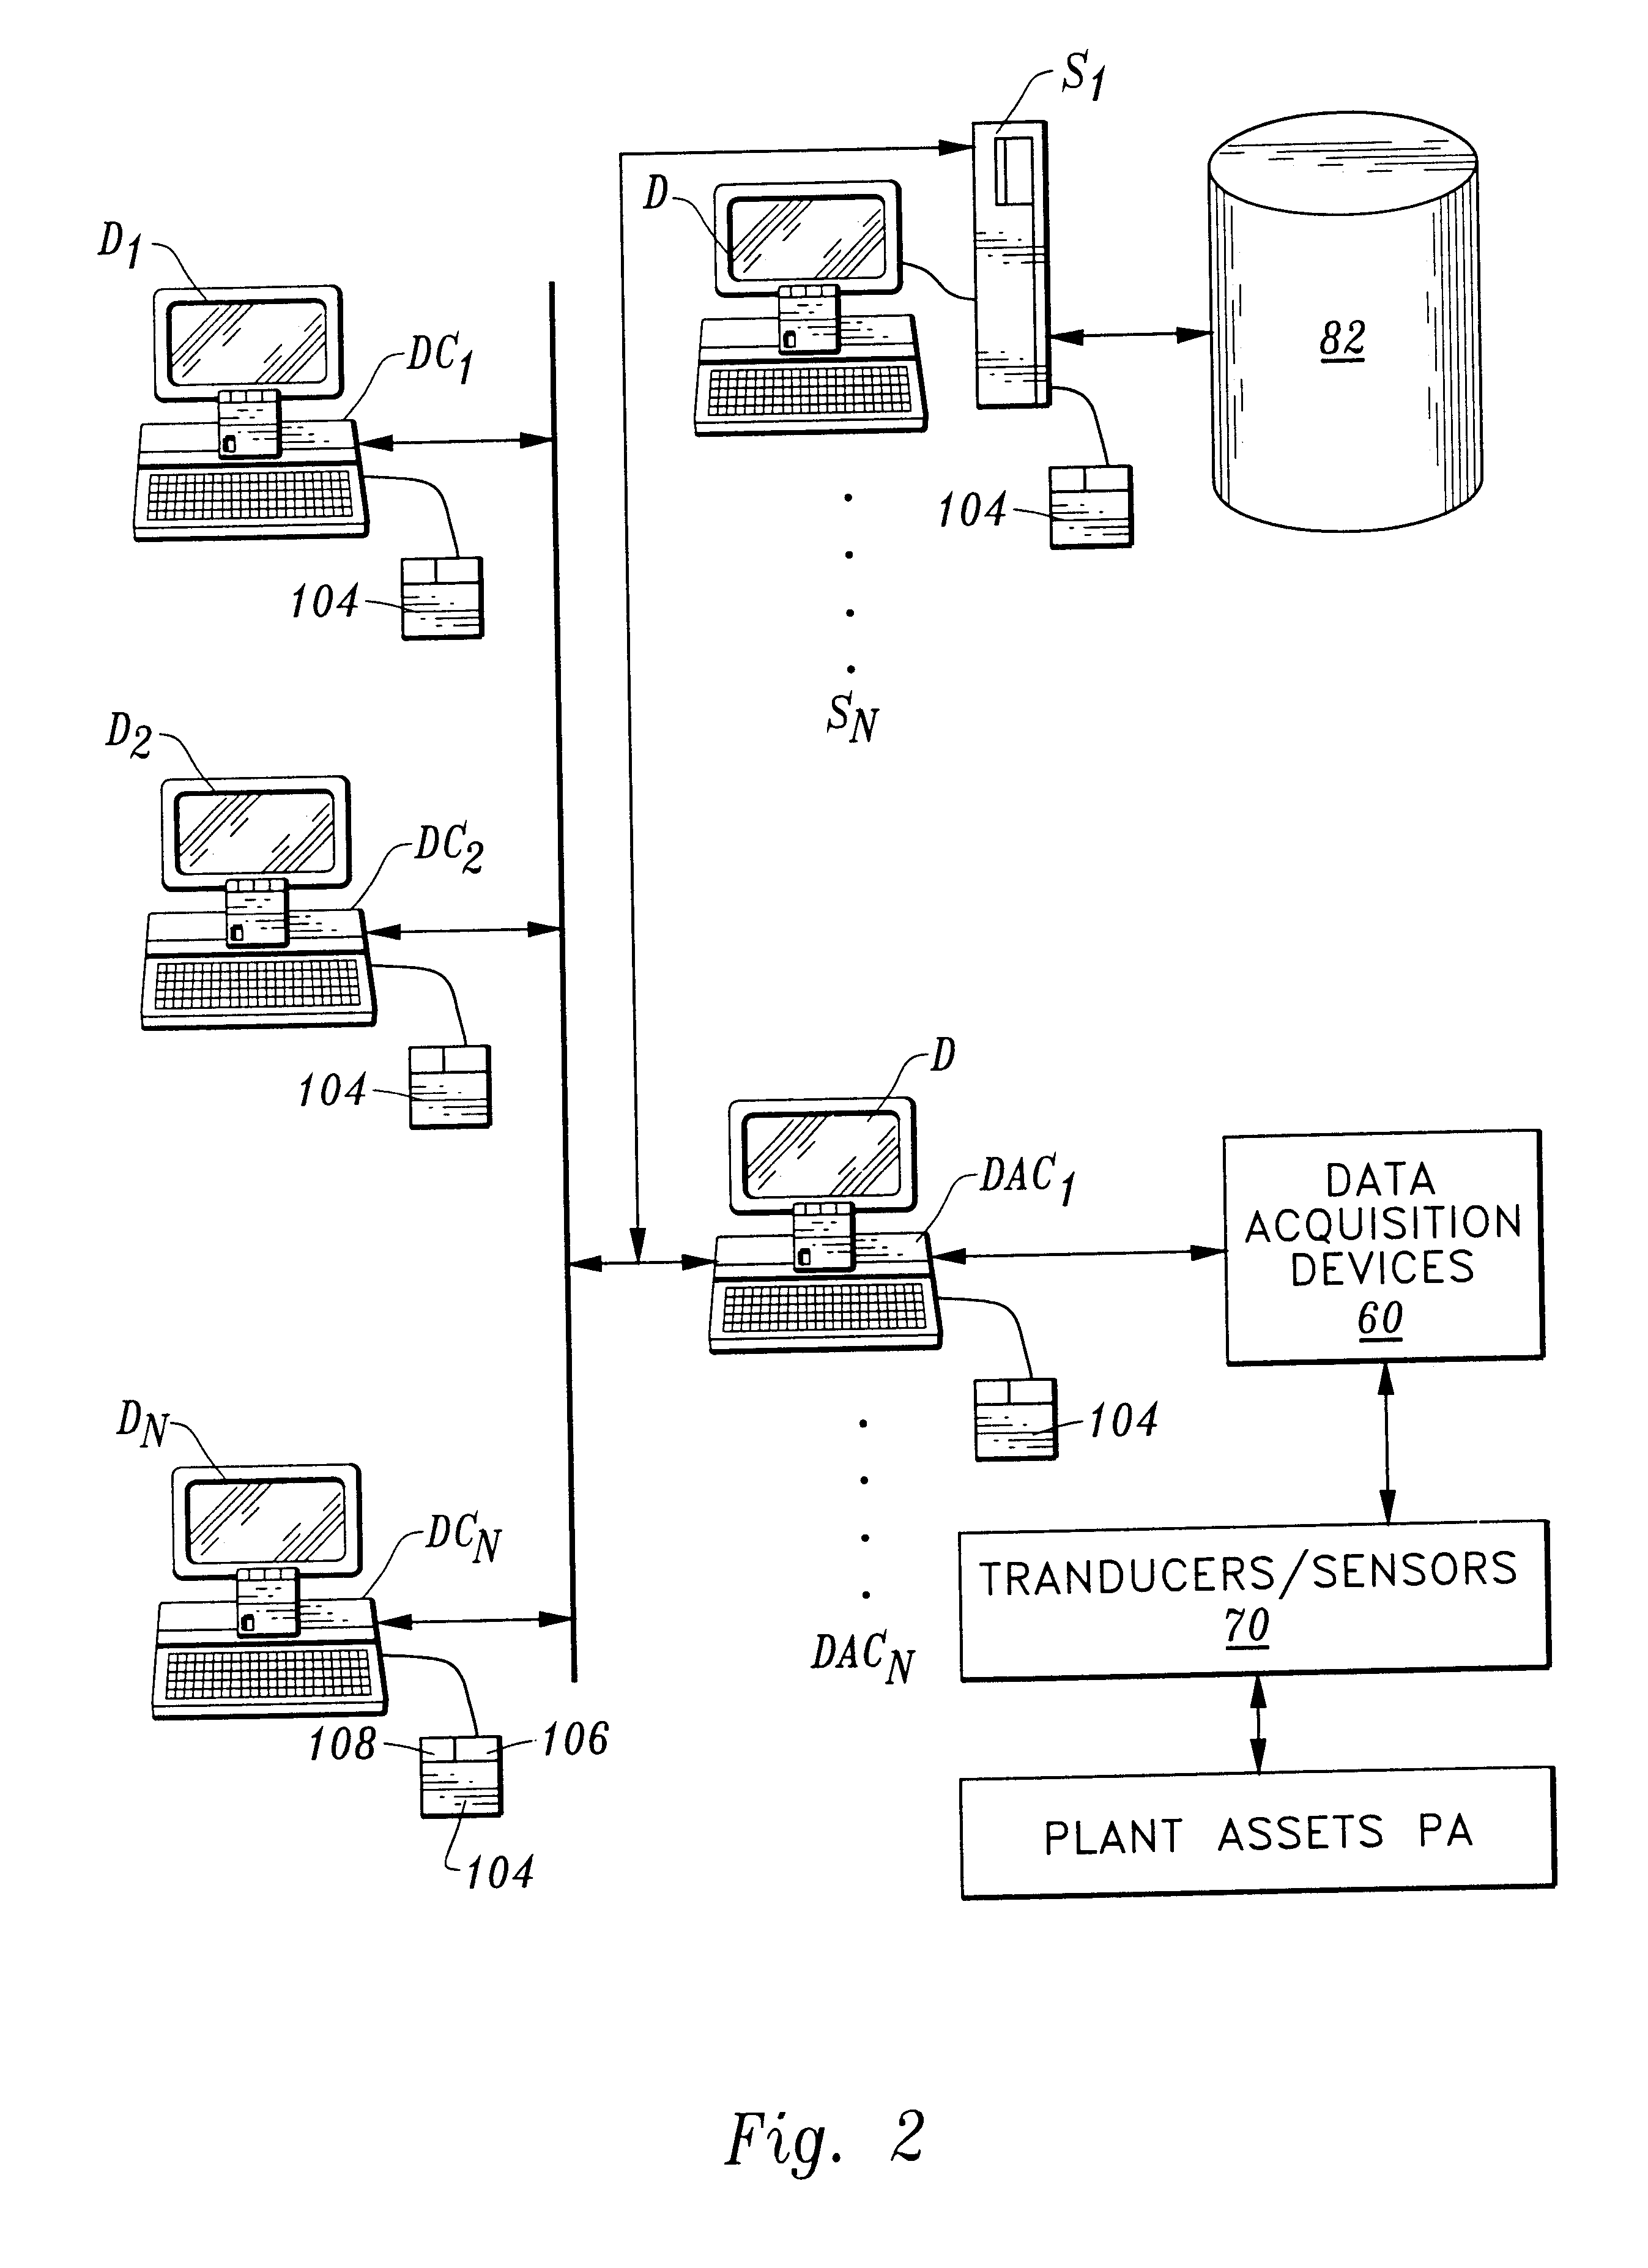 Industrial plant asset management system: apparatus and method